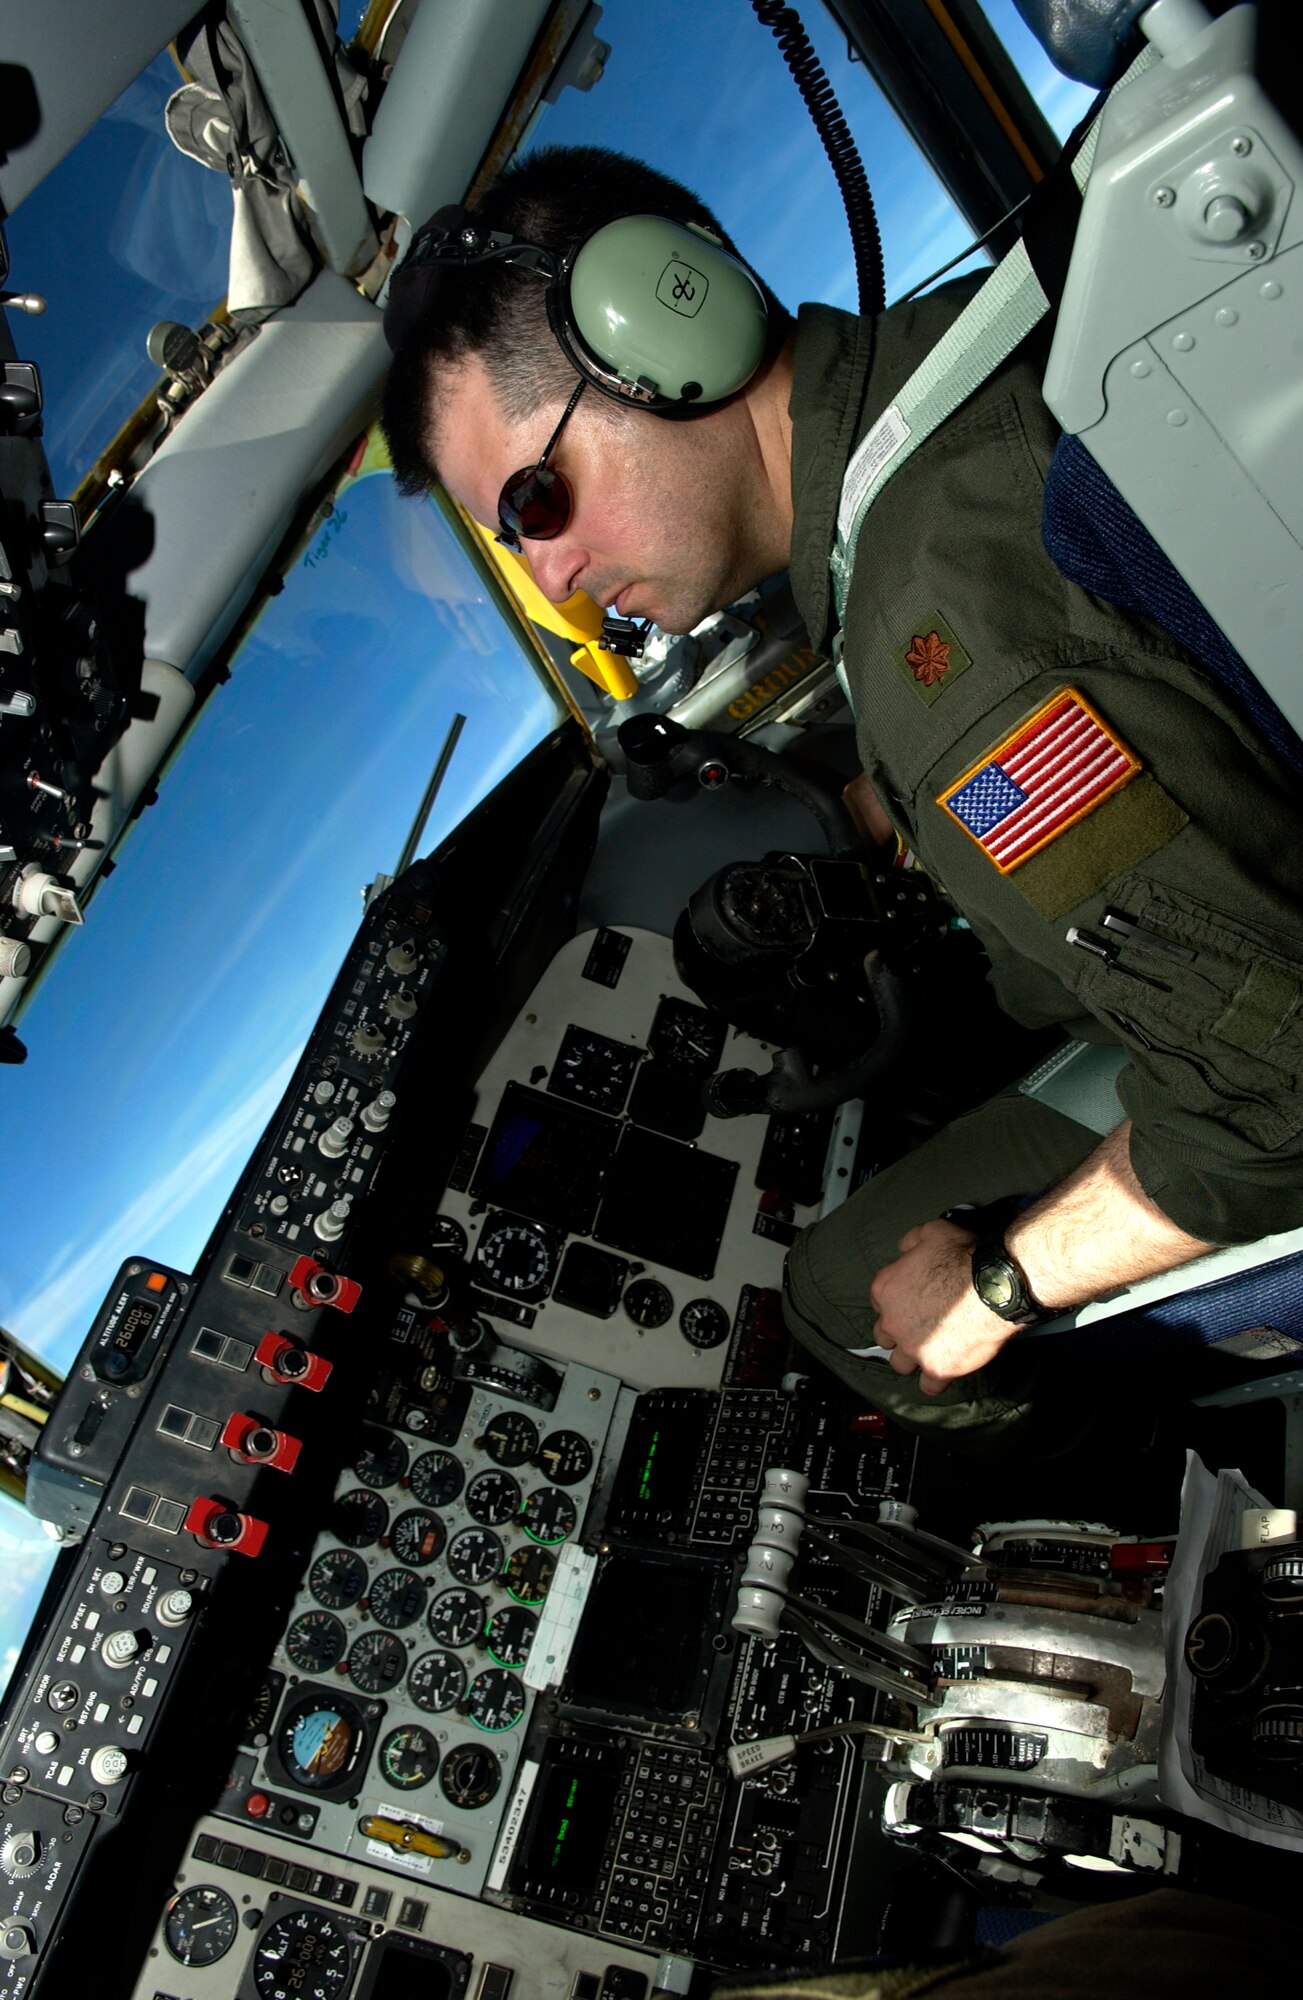 ANDERSEN AFB, GUAM - Maj. Dave Jarmon, an instructor pilot with the 905th Air Refueling Squadron, New Hampshire Air National Guard, flies a KC-135 Stratotanker, during Valiant Shield, Aug. 9, 2007.  During the exercise, U.S. Air Force aircraft and personnel from stateside bases and Kadena Air Base, Japan, work together as part of an expeditionary air wing based at Andersen AFB, Guam. Andersen AFB will also be the beddown location for approximately 64 U.S. Air Force and 29 U.S. Navy aircraft, plus transient aircraft, during Valiant Shield. Valiant Shield 07, the largest joint exercise in recent history, includes 30 ships, more than 280 aircraft and more than 20,000 service members from the Navy, Marine Corps, Air Force and Coast Guard. (U.S. Air Force photo by Senior Airman Miranda Moorer) 